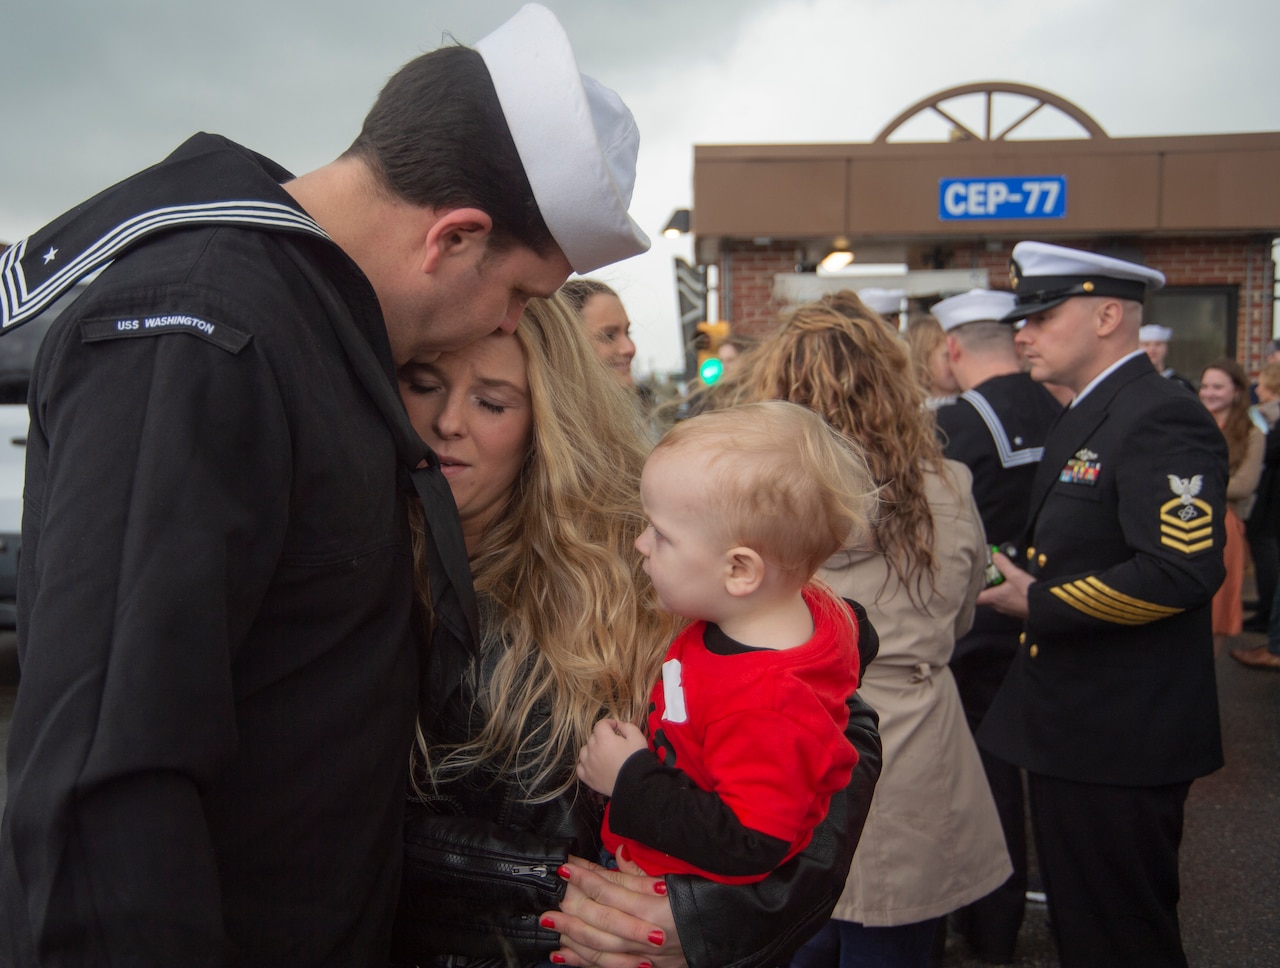 A service member hugs a woman and child.